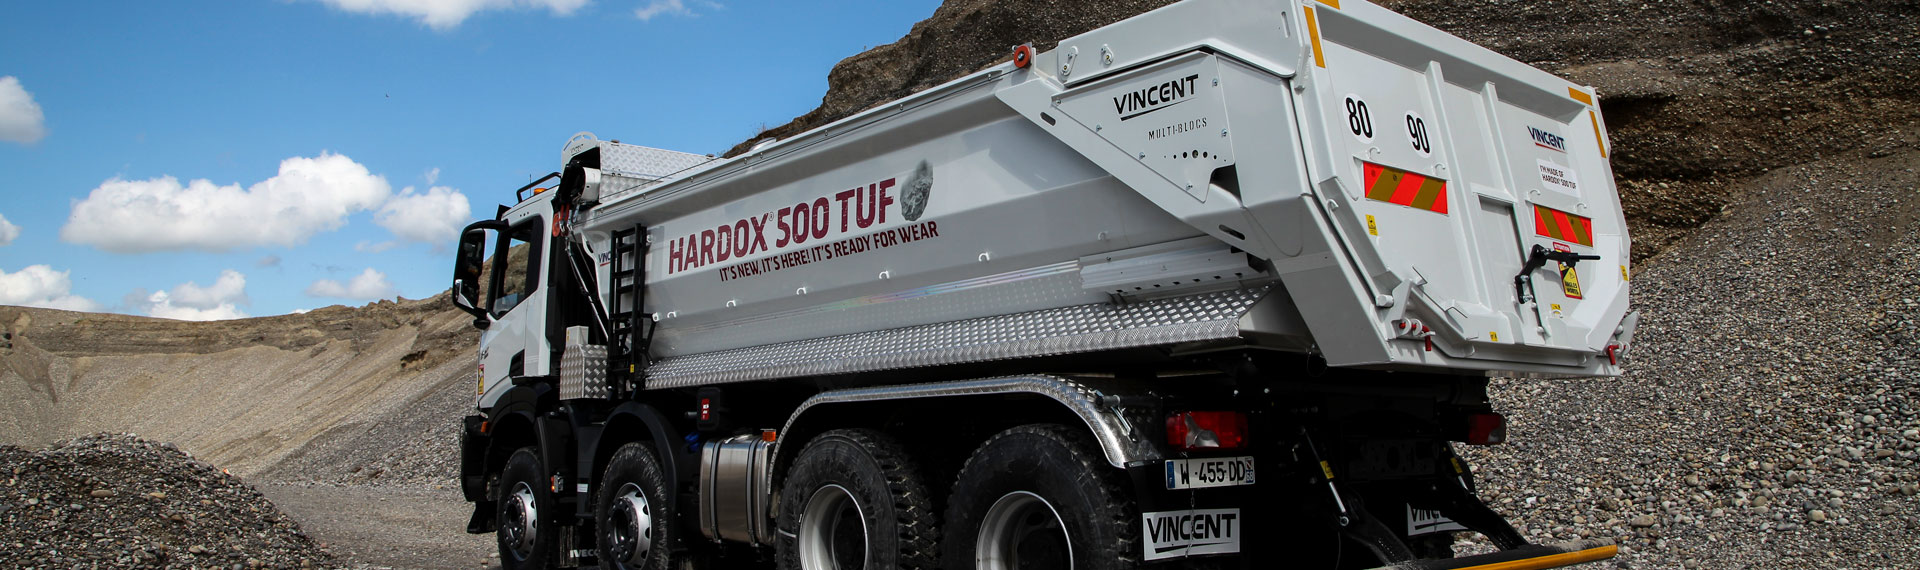 Greener more profitable transports with Bennes Vincents tipper bodies made of Hardox 500 Tuf steel